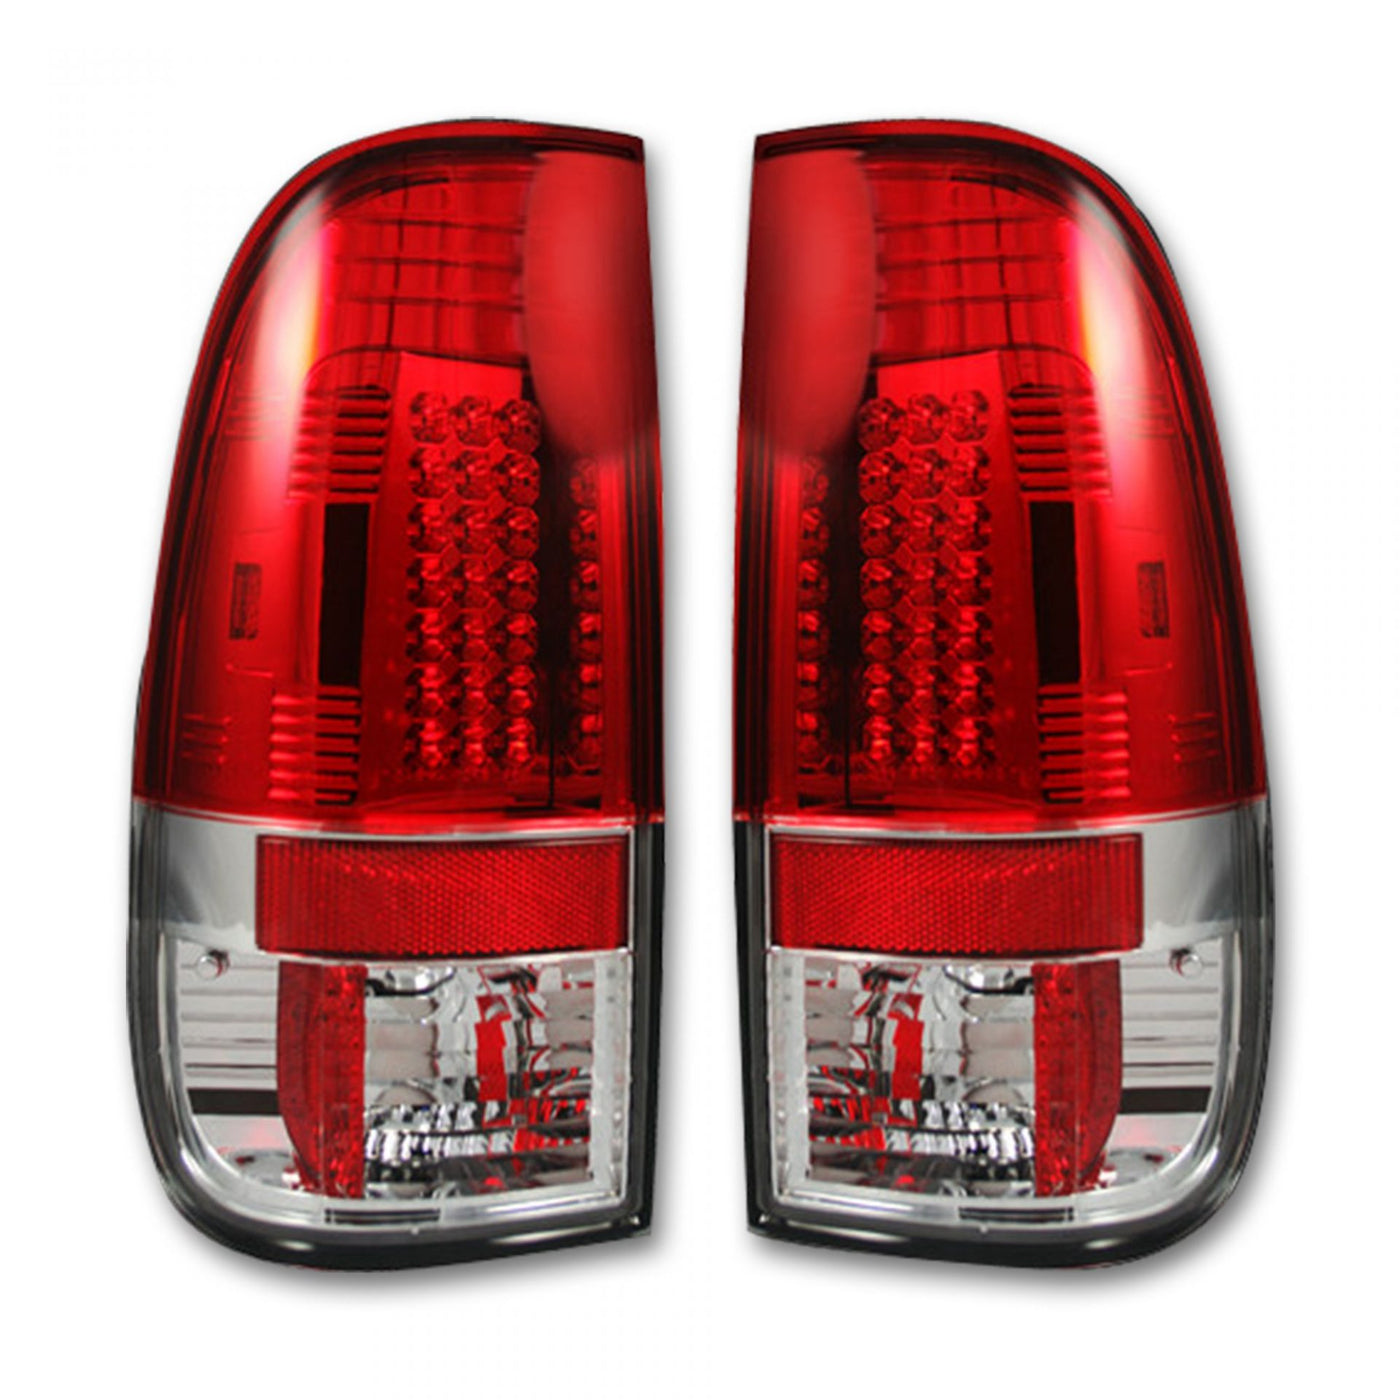 Ford Super Duty Tail Lights, Ford Tail Lights, Super Duty 08-16 Tail Lights, Tail Lights, Red Tail Lights, Recon Tail Lights